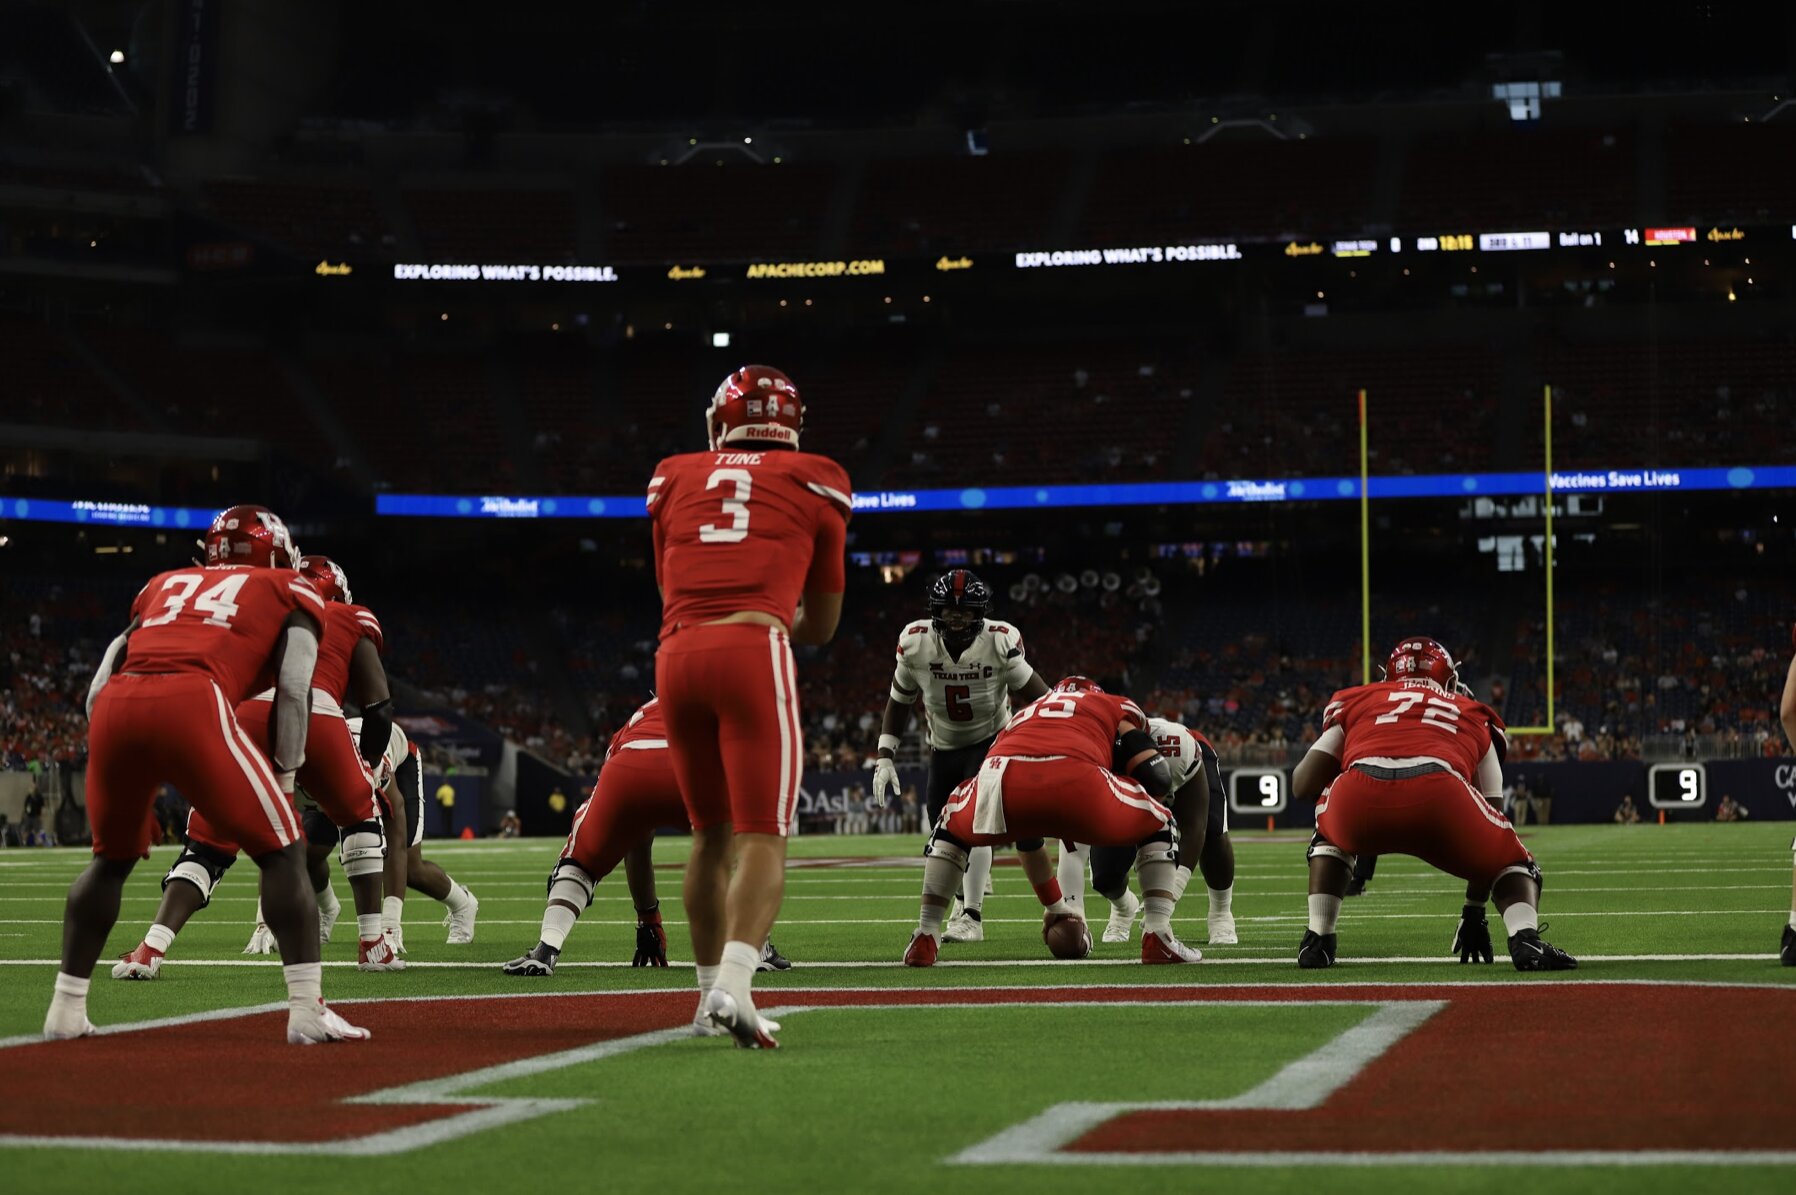 Clayton Tune and the UH offense start deep in the Cougars own territory during a second quarter drive Saturday night against Texas Tech. | Armando Yanez/The Cougar